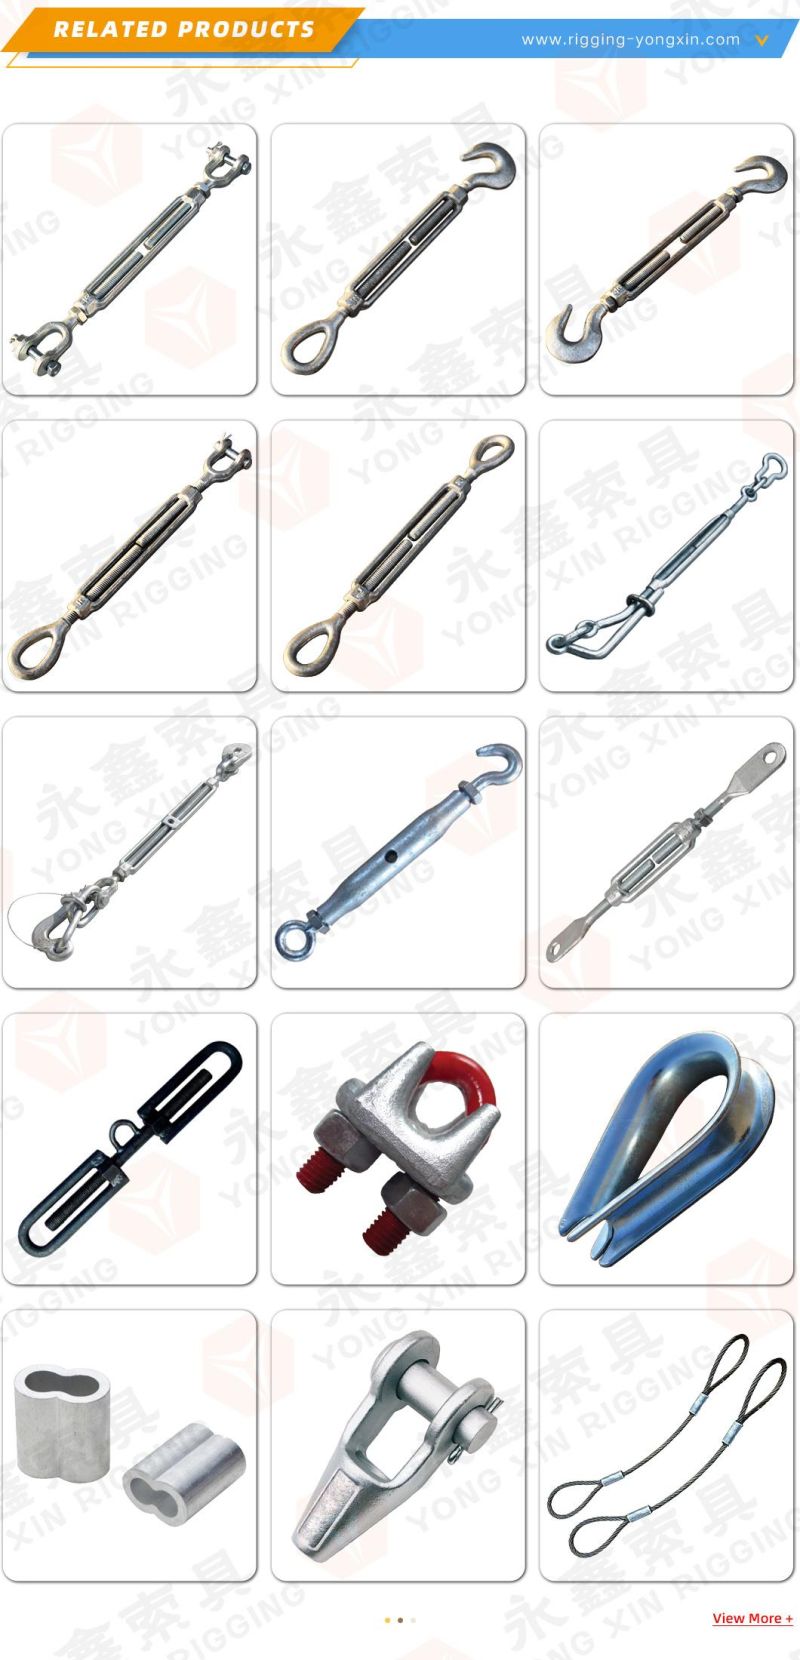 Us Type Closed Body Marine Jaw Jaw Turnbuckle 316 Stainless Steel Rigging From Chinese Supplier